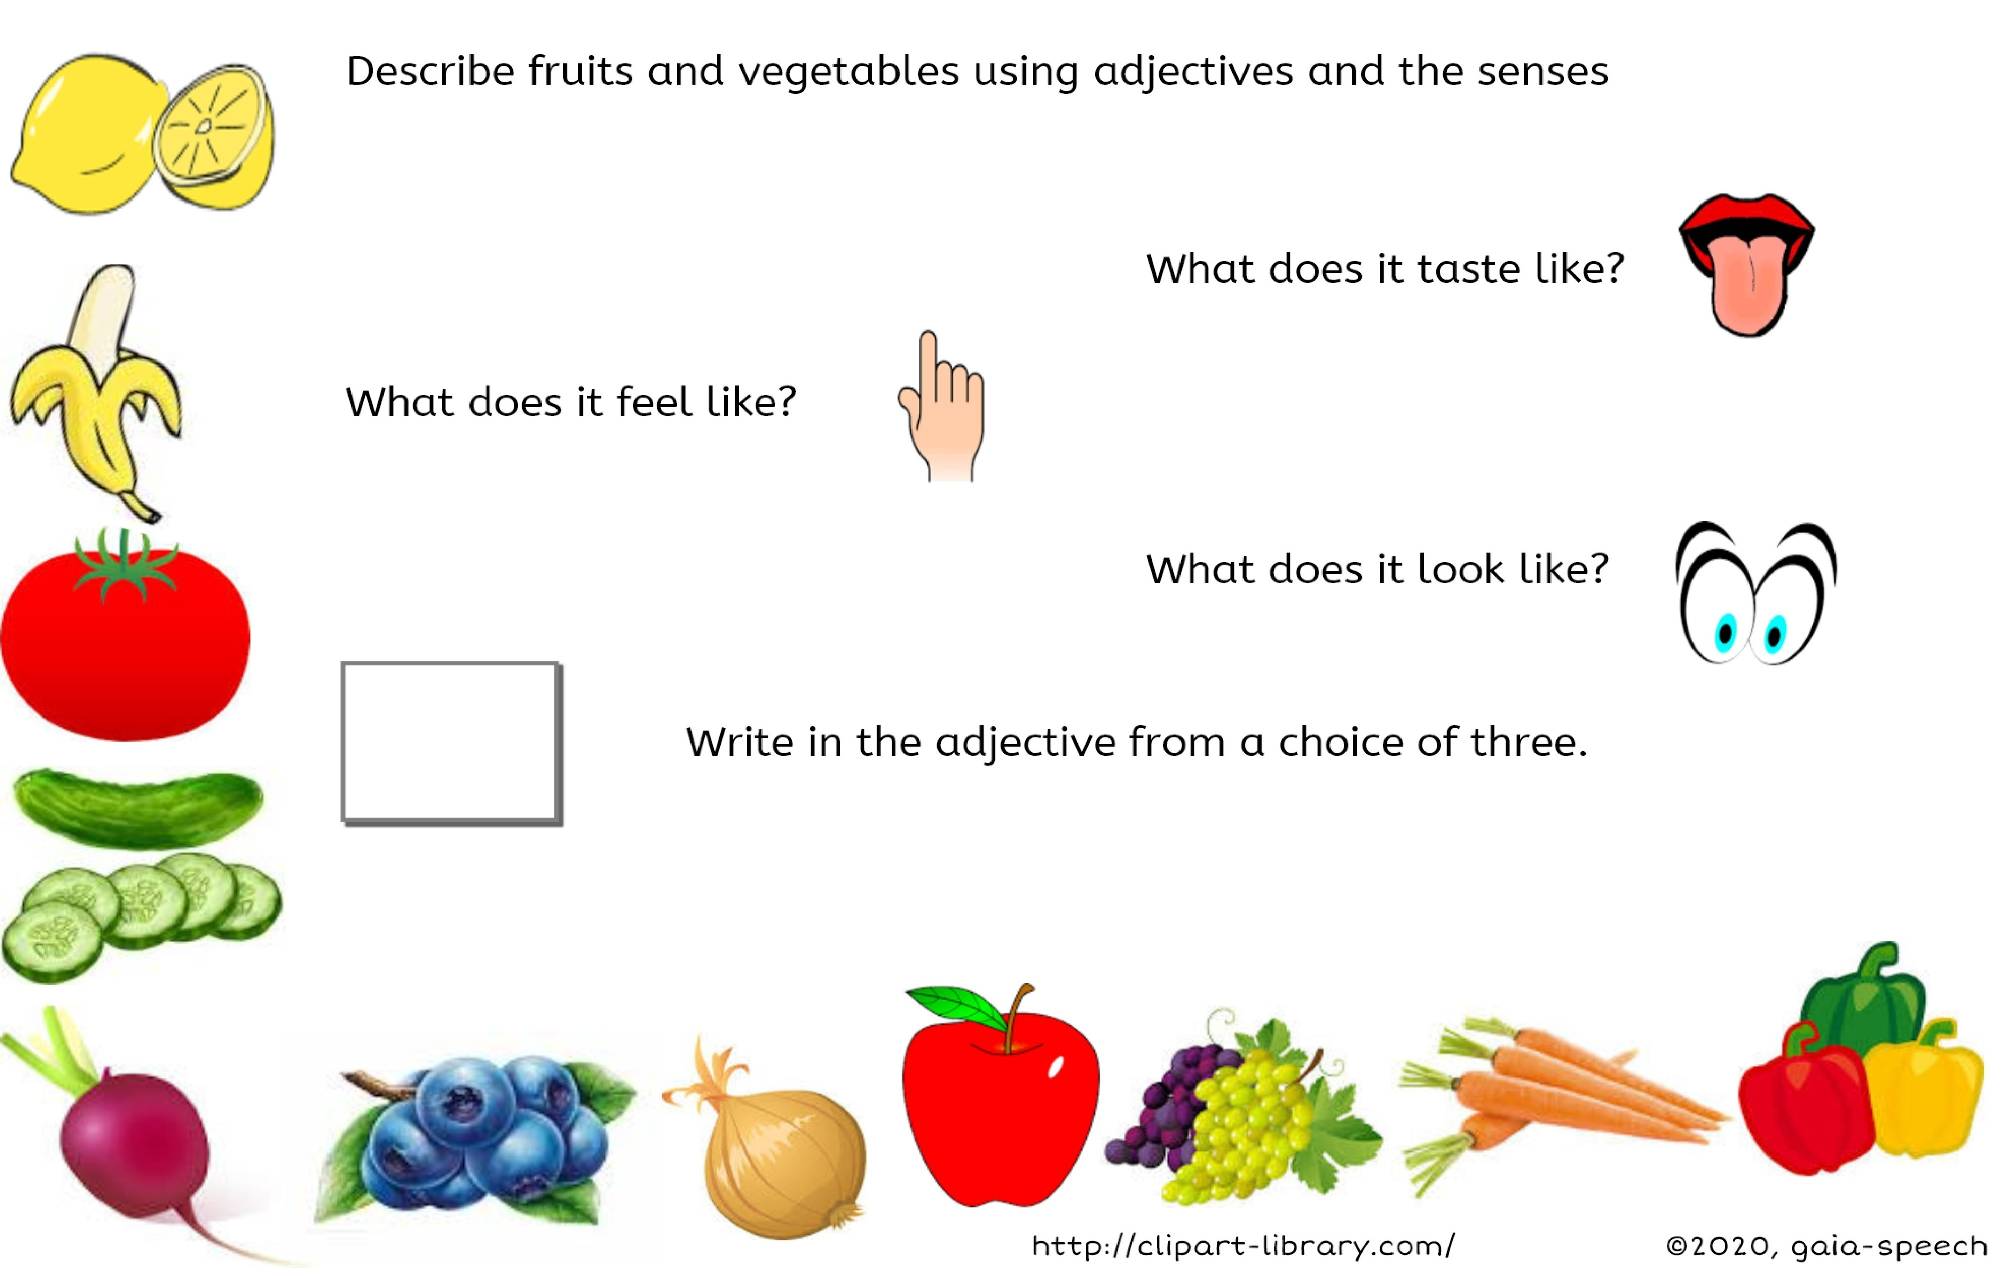 ADJECTIVES FOR FRUITS AND VEGETABLES THROUGH SENSES's featured image